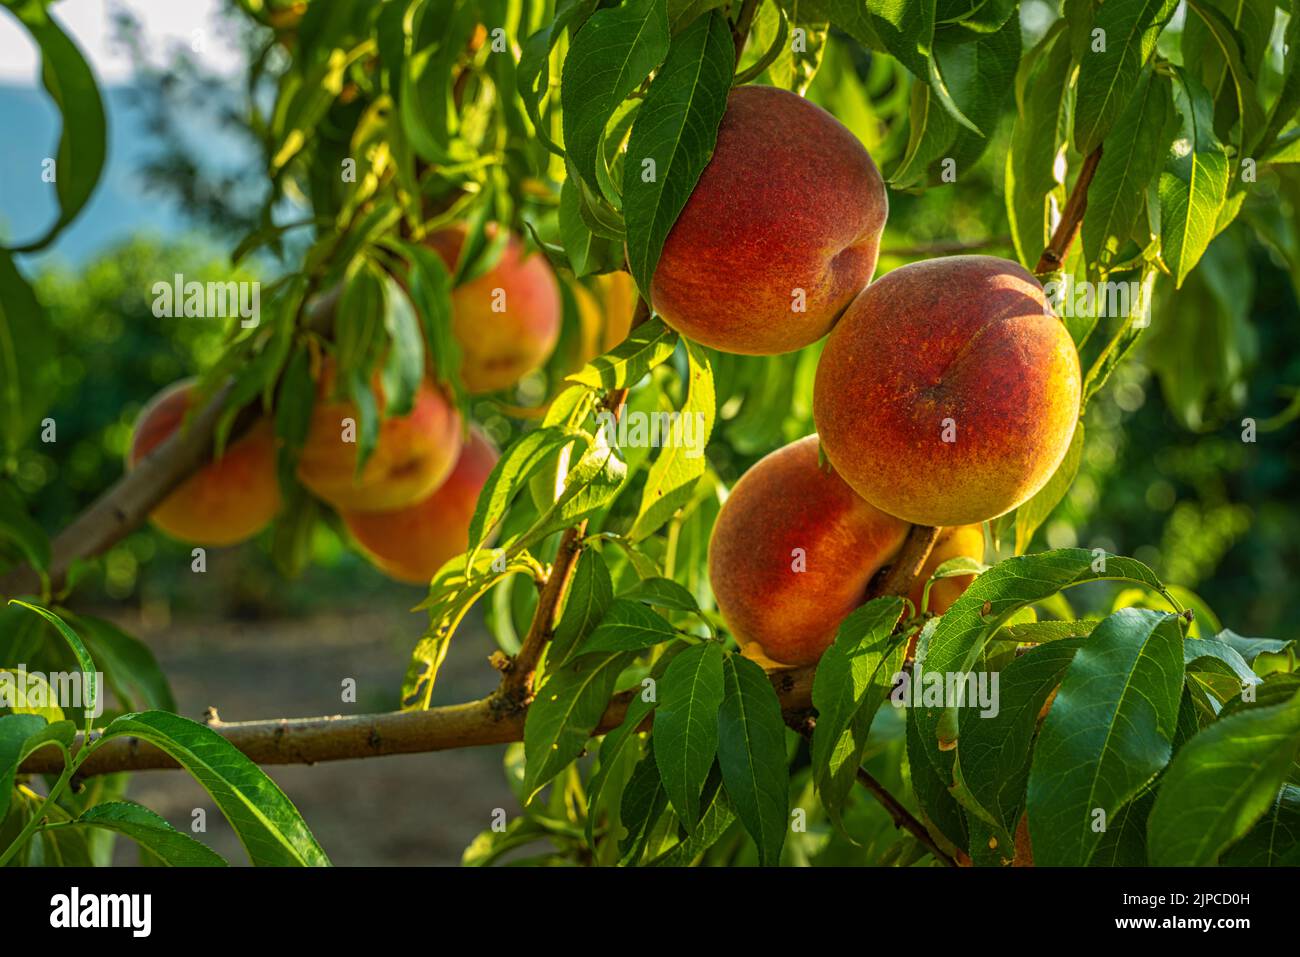 Percoca peach, variety of peach with compact yellow flesh and adherent to the seed. Cultivation from organic farming. Abruzzo, Italy, Europe Stock Photo